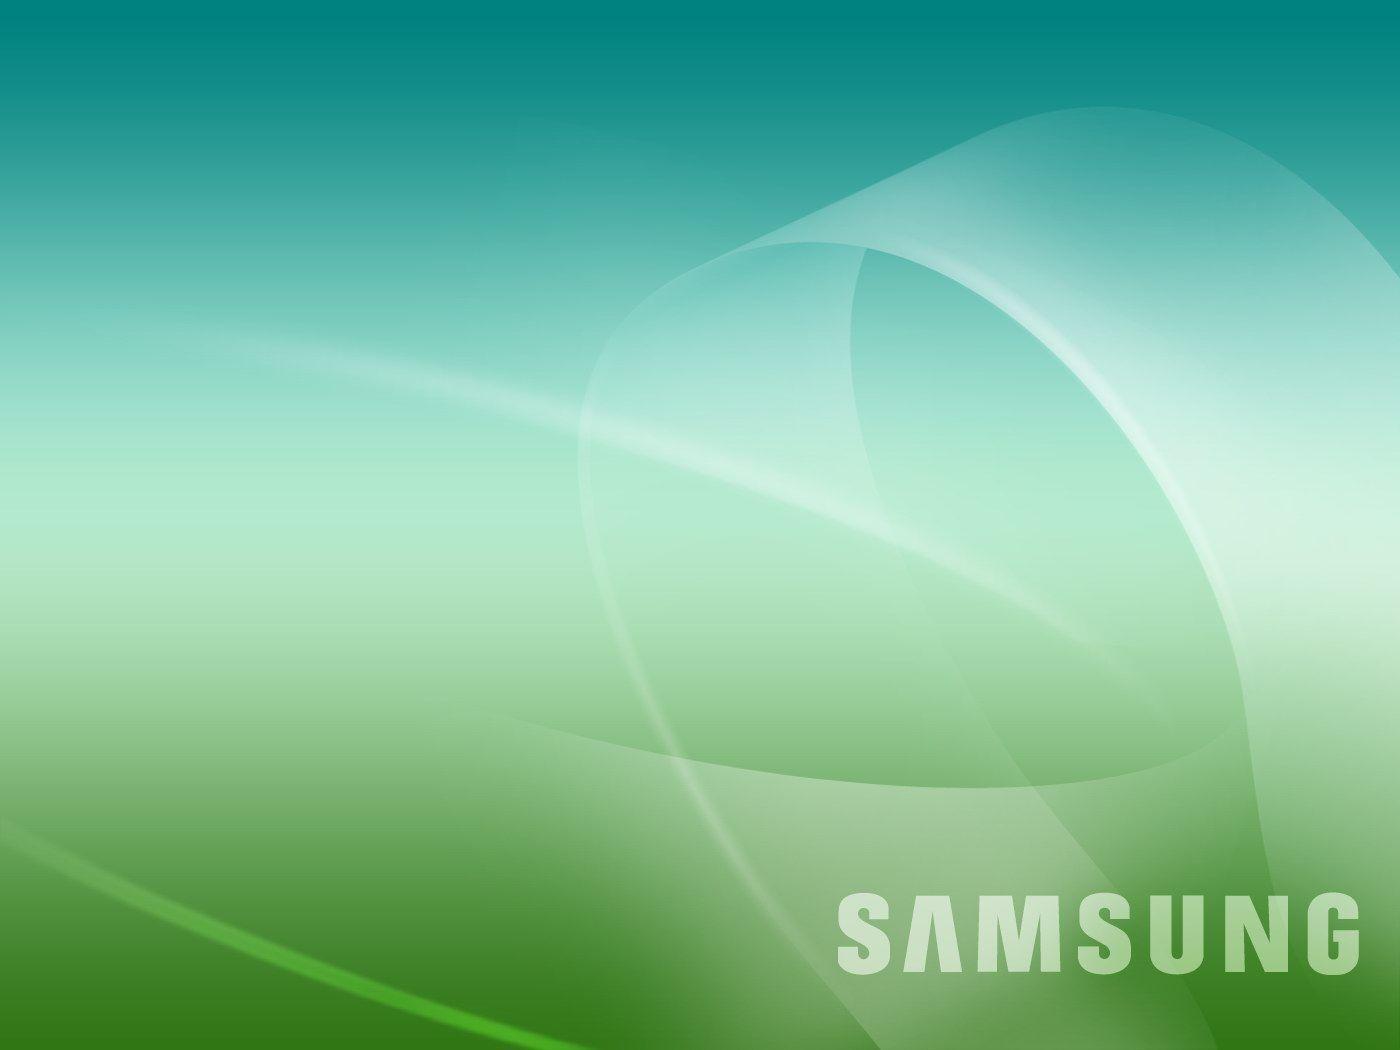 Samsung Wallpapers Gallery